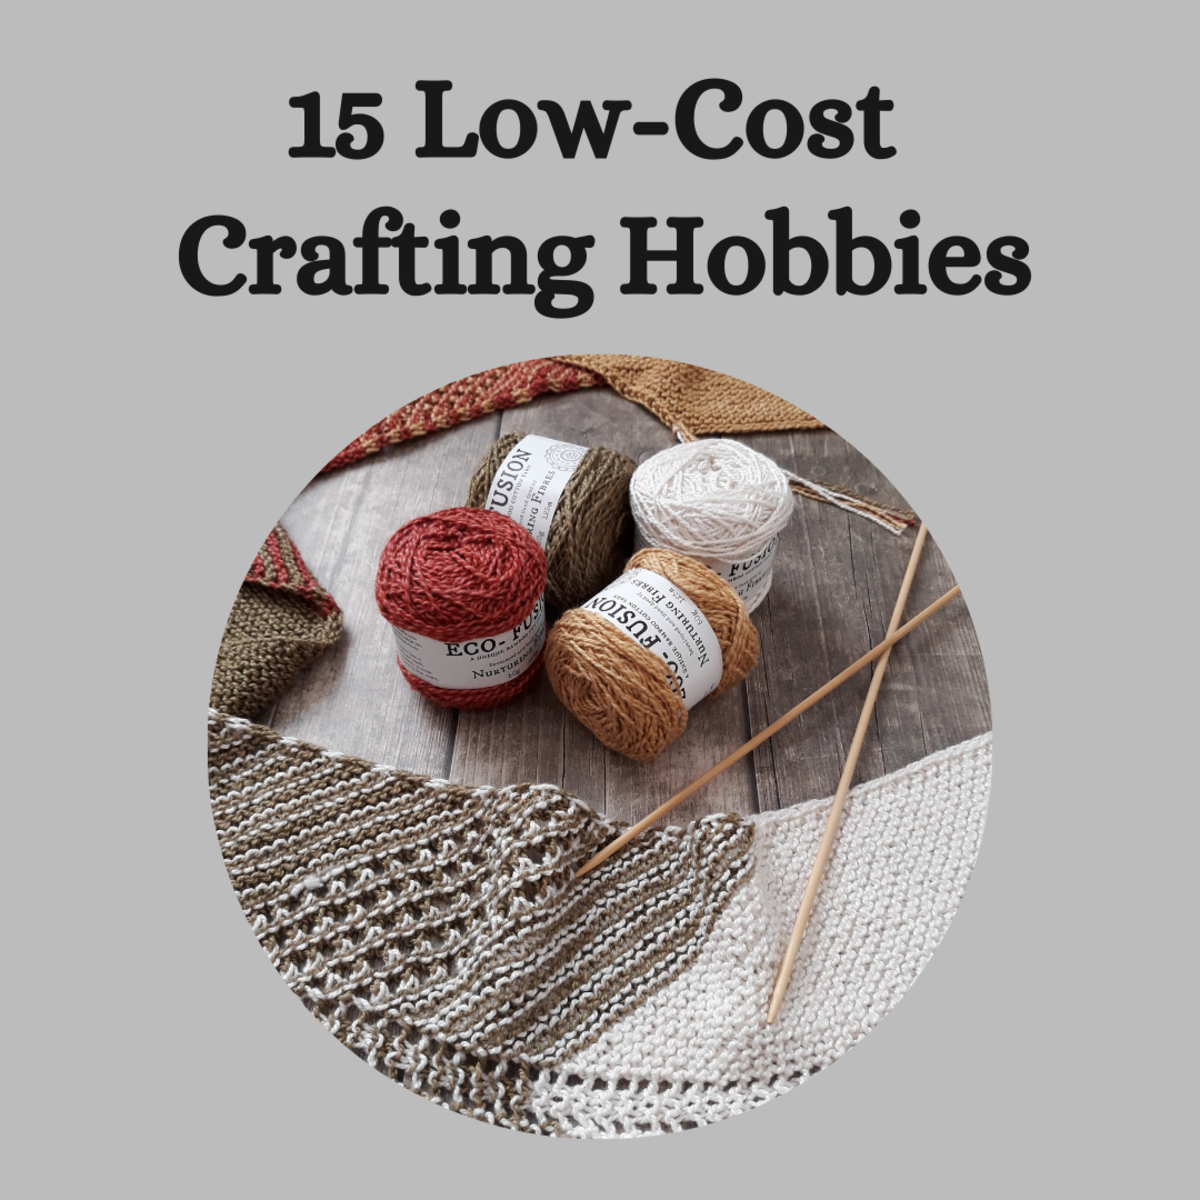 15 Low-Cost Craft Hobby Ideas for Beginners